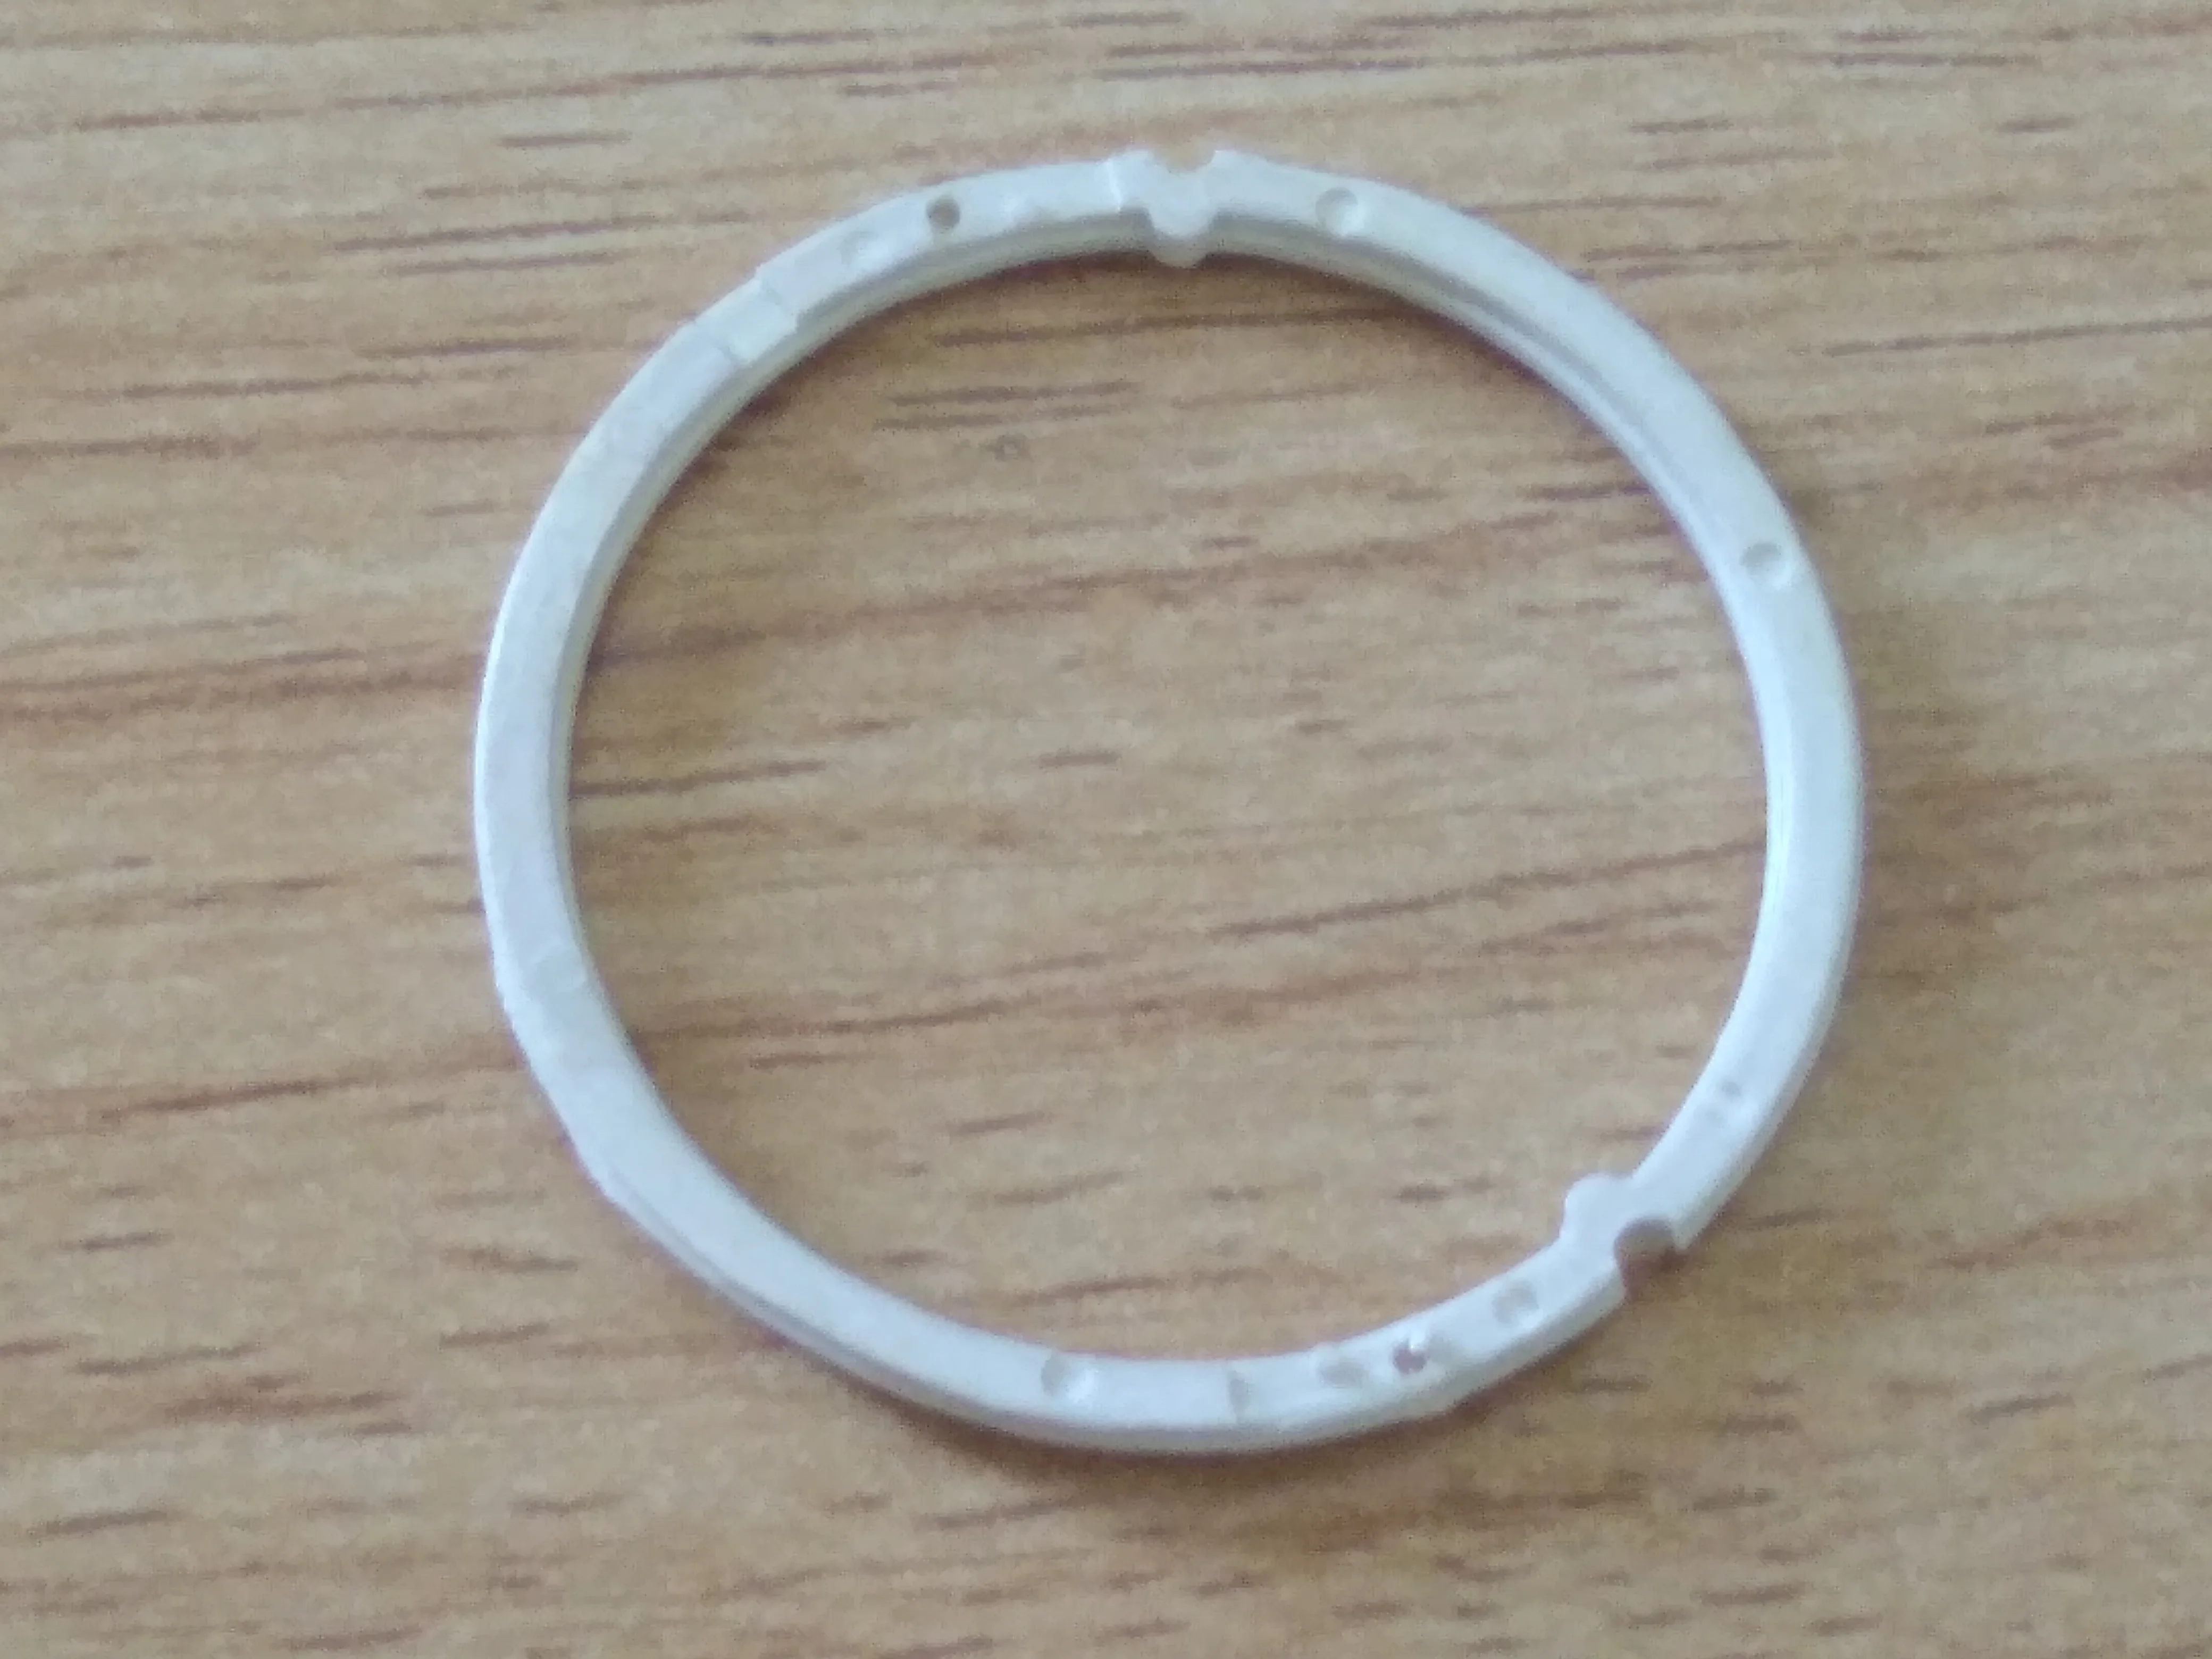 5pcs/lot Watch Part Replacement Plastic Movement Spacer Ring for 2836 2846 2824 2834 enlarge